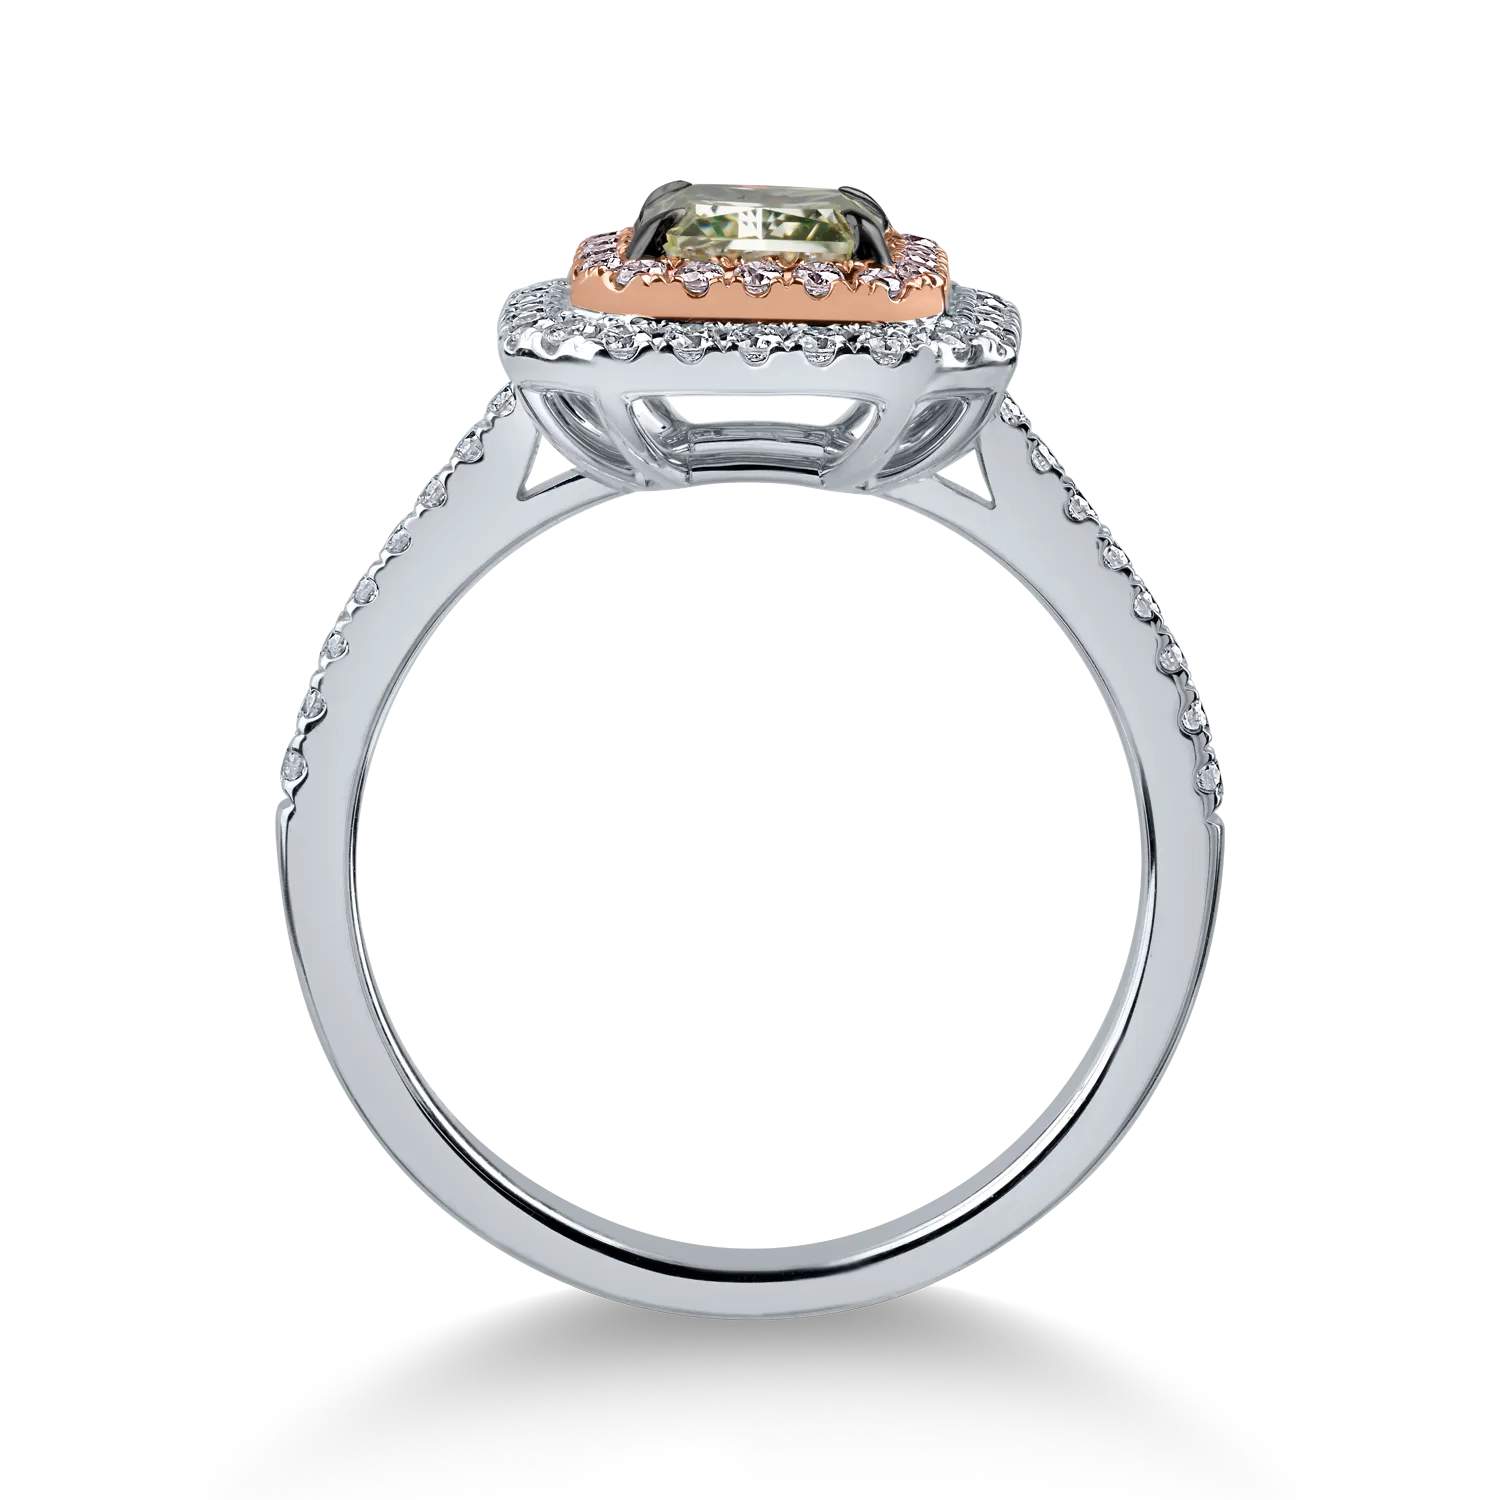 White-rose gold ring with one 1.17ct central green diamond and 0.44ct colorless and pink diamonds halo pave